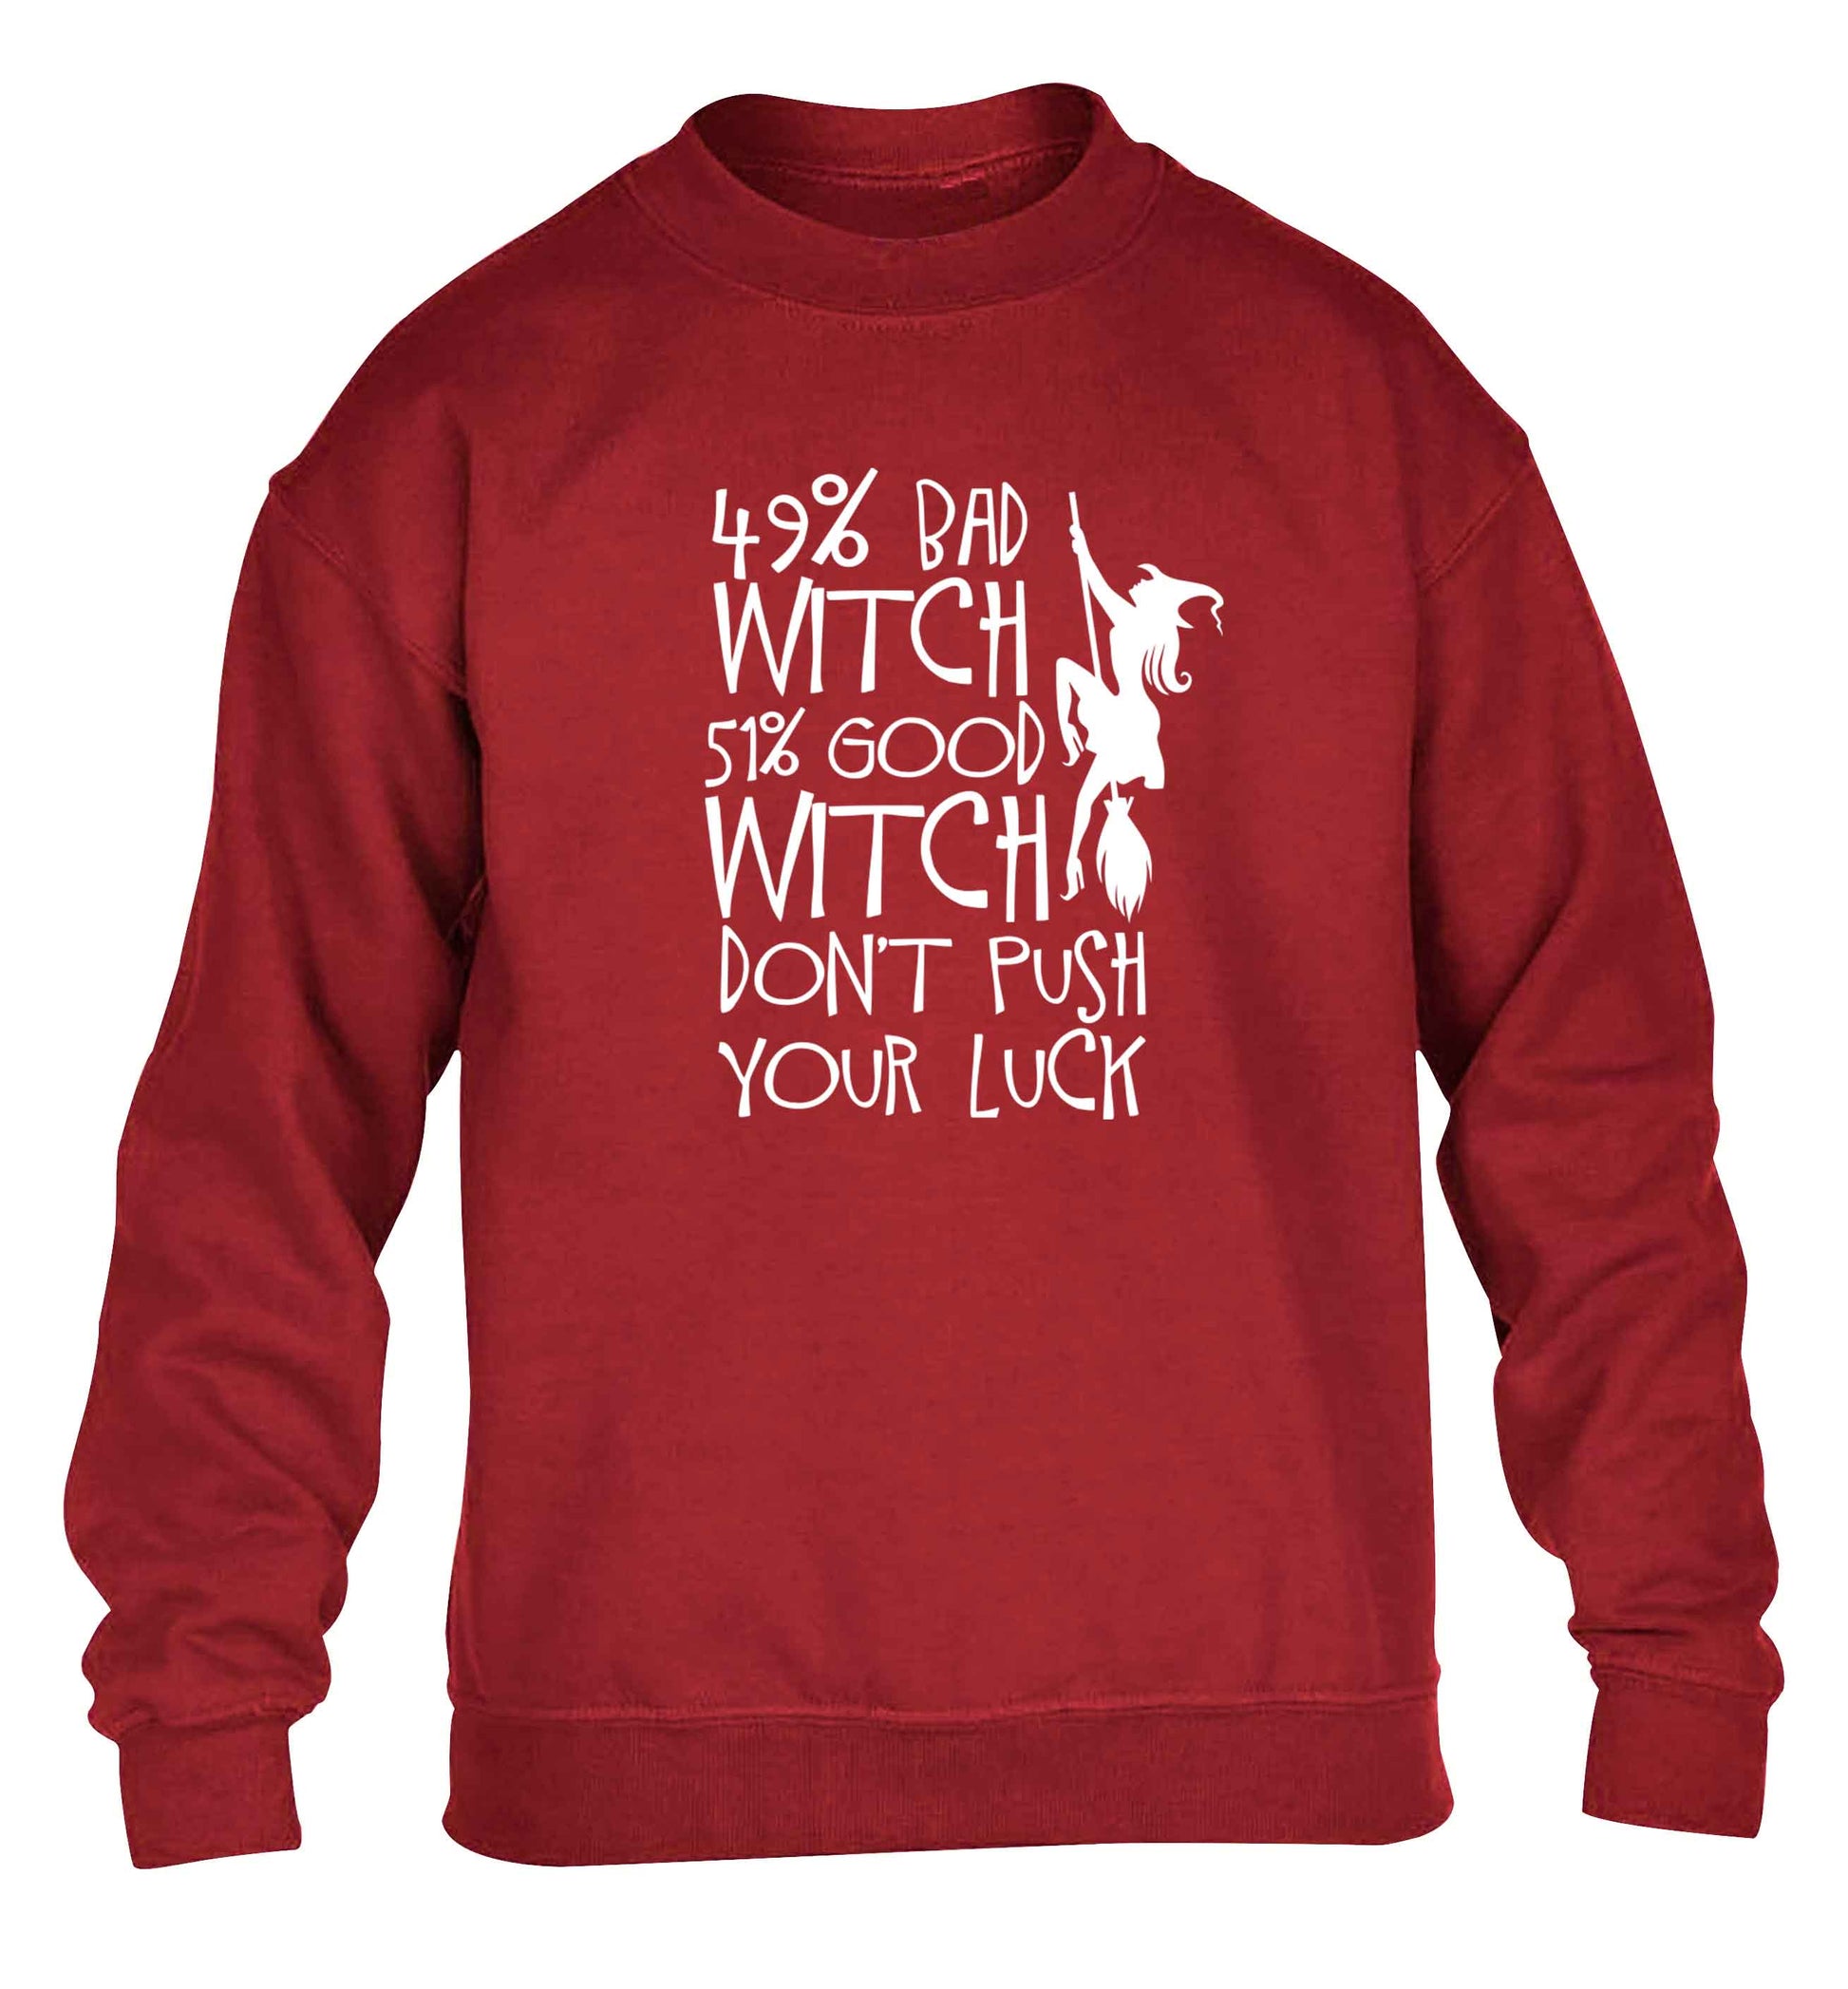 49% bad witch 51% good witch don't push your luck children's grey sweater 12-13 Years